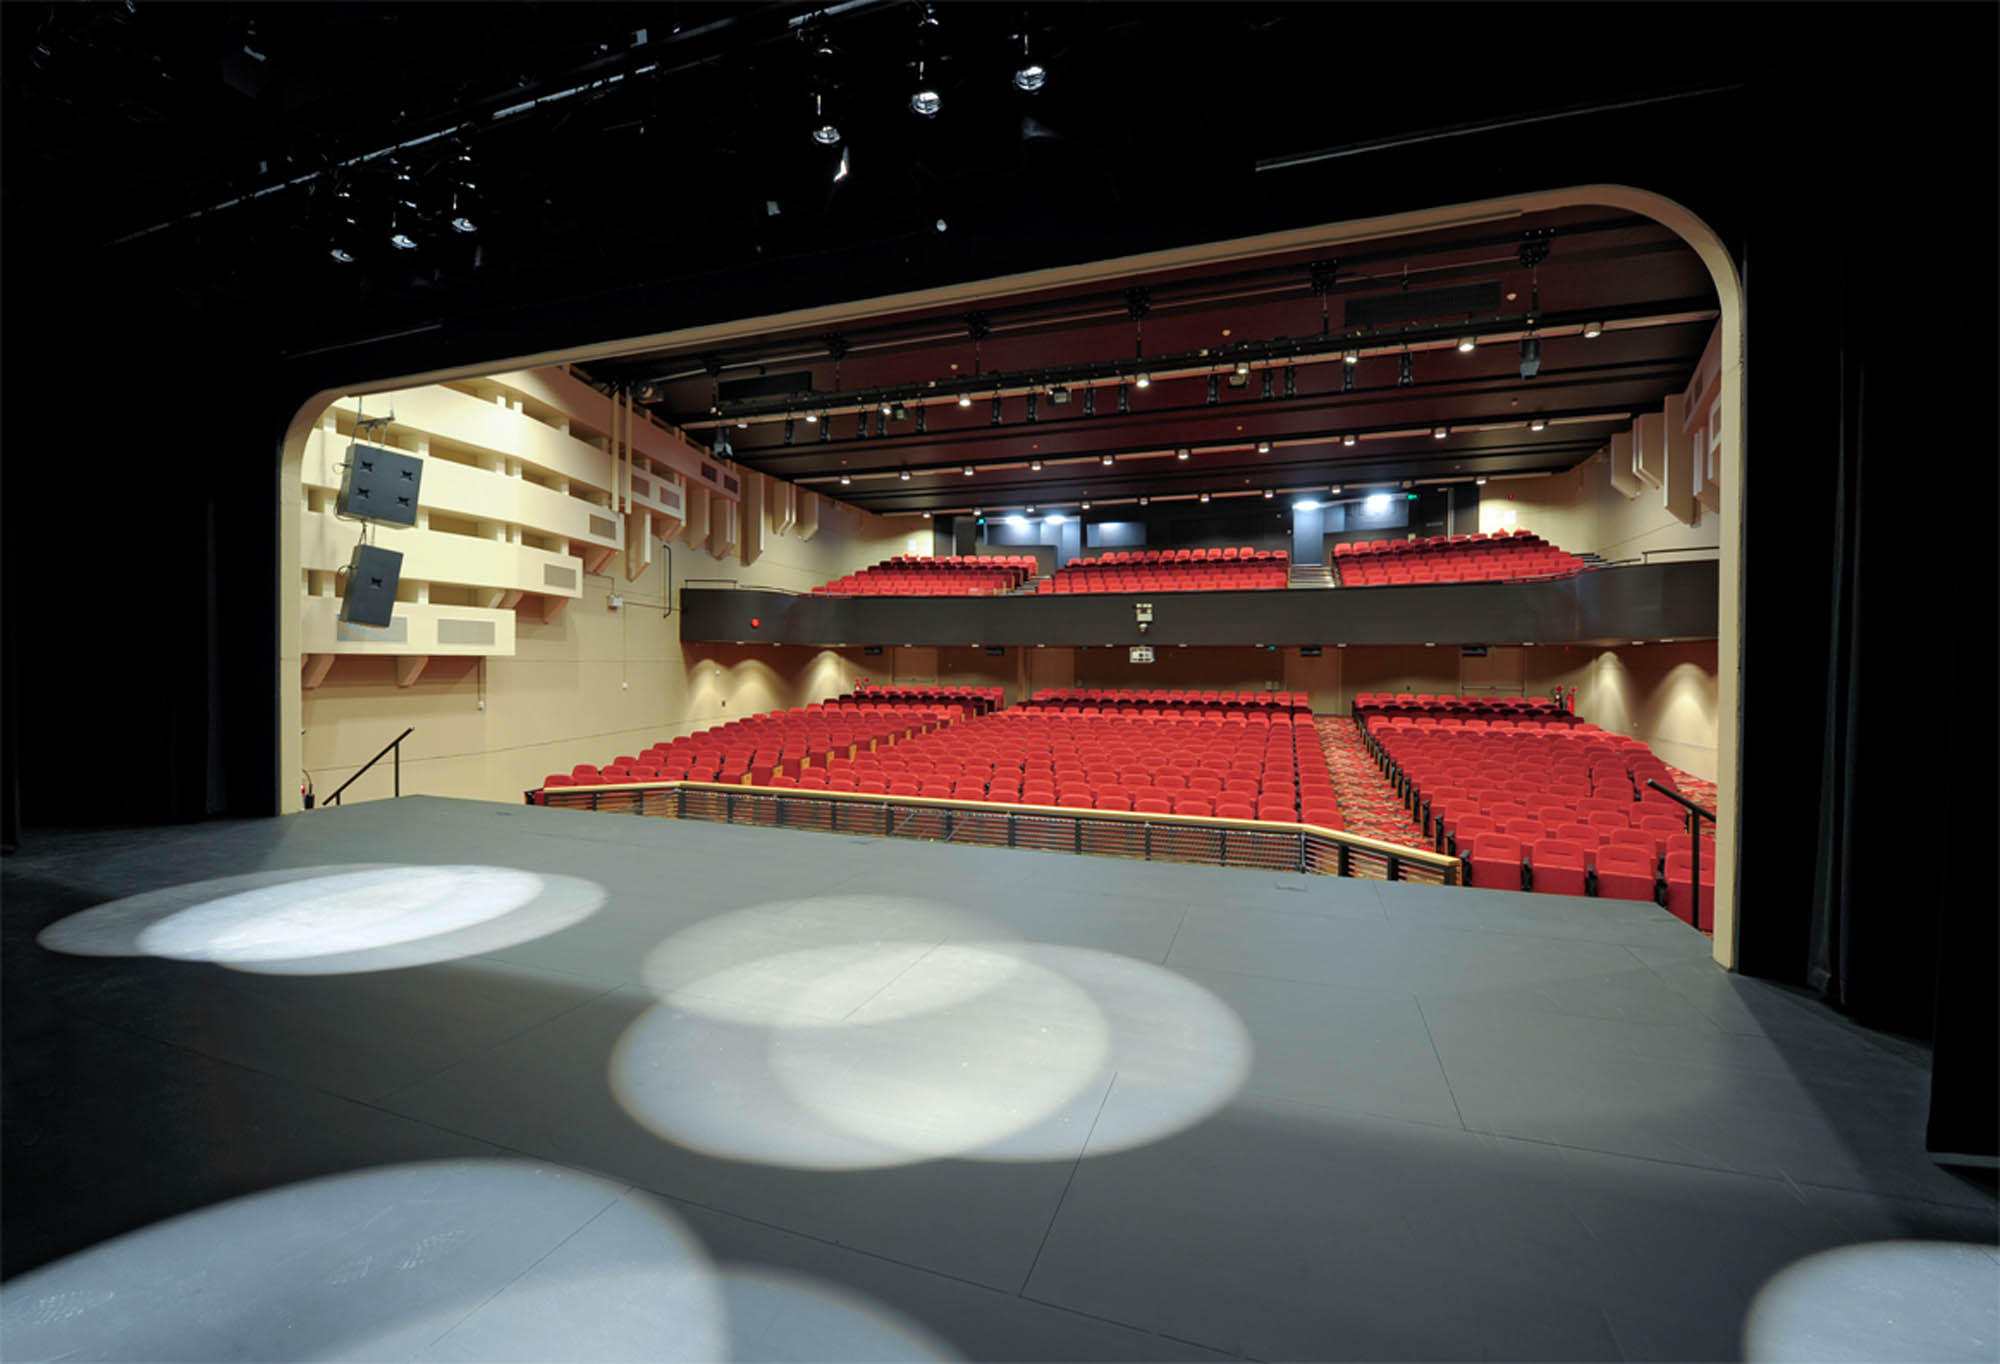 griffith duncan theatre education interior nsw university stage spotlight seats red